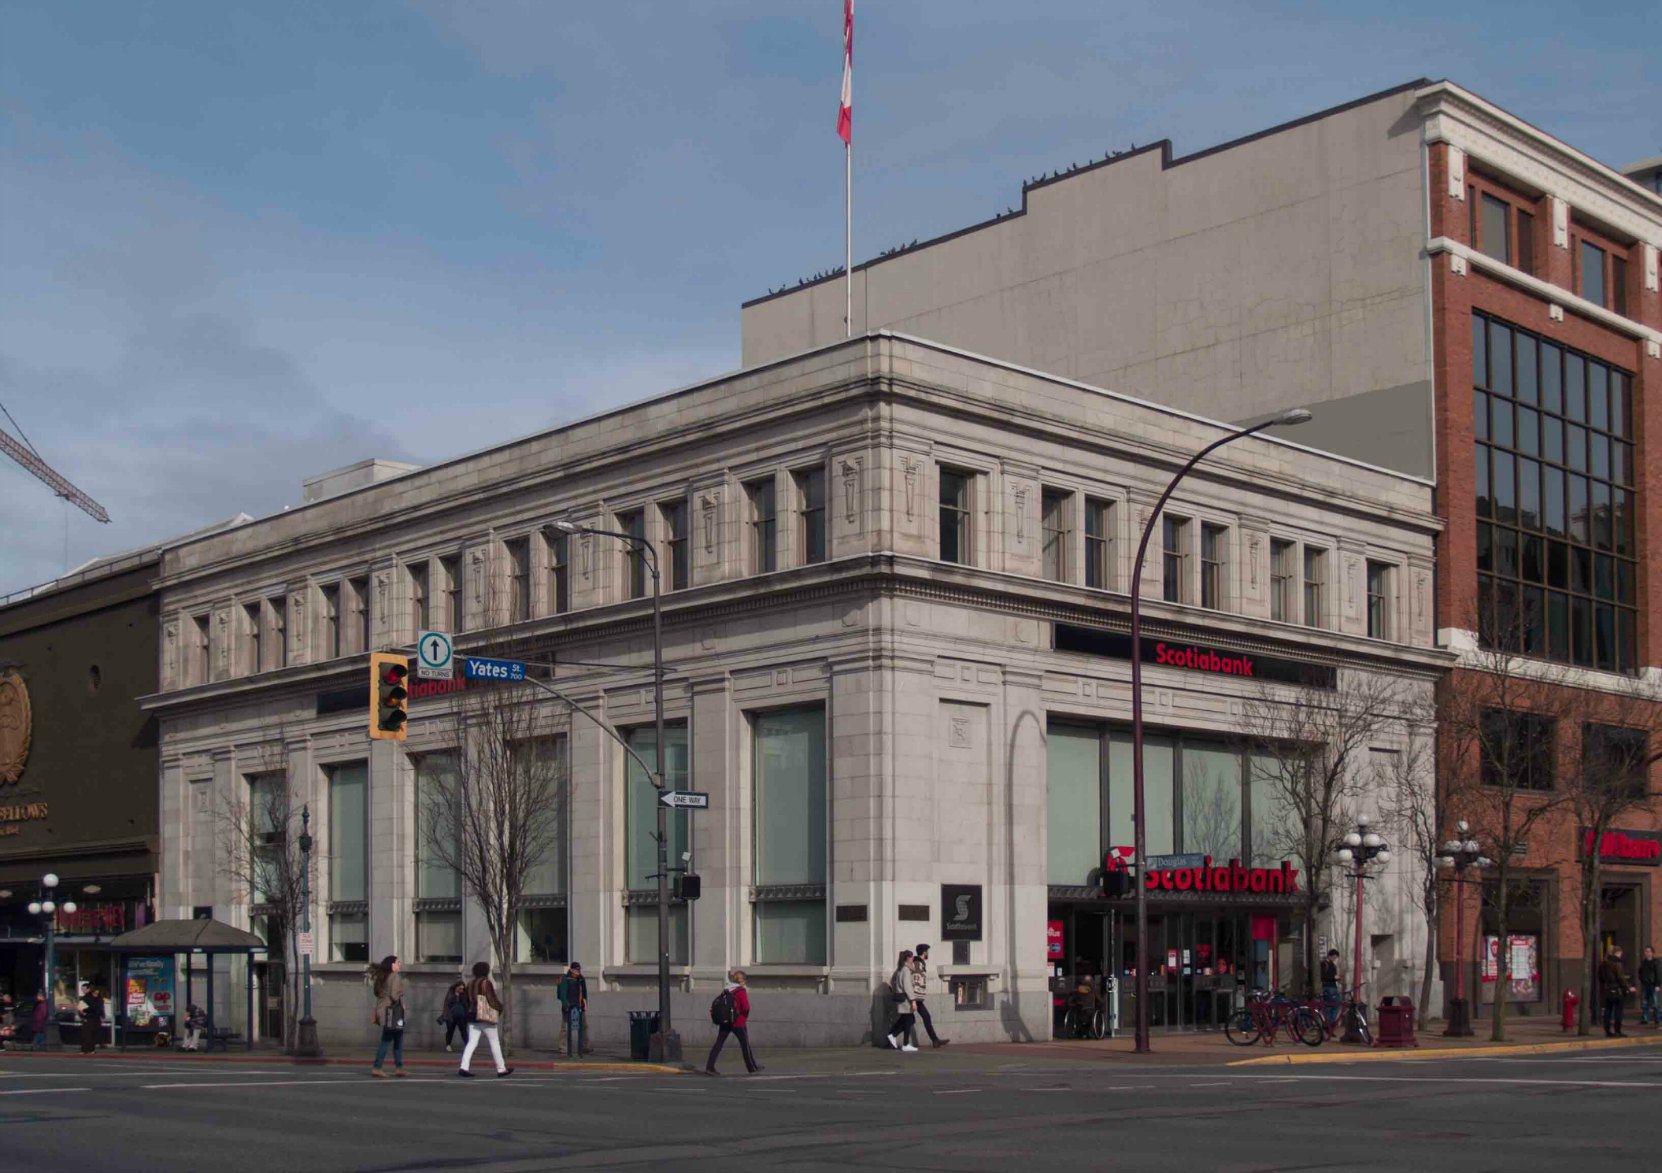 ScotiaBank at 702 Yates Street, built in 1923 with additions in 1963.